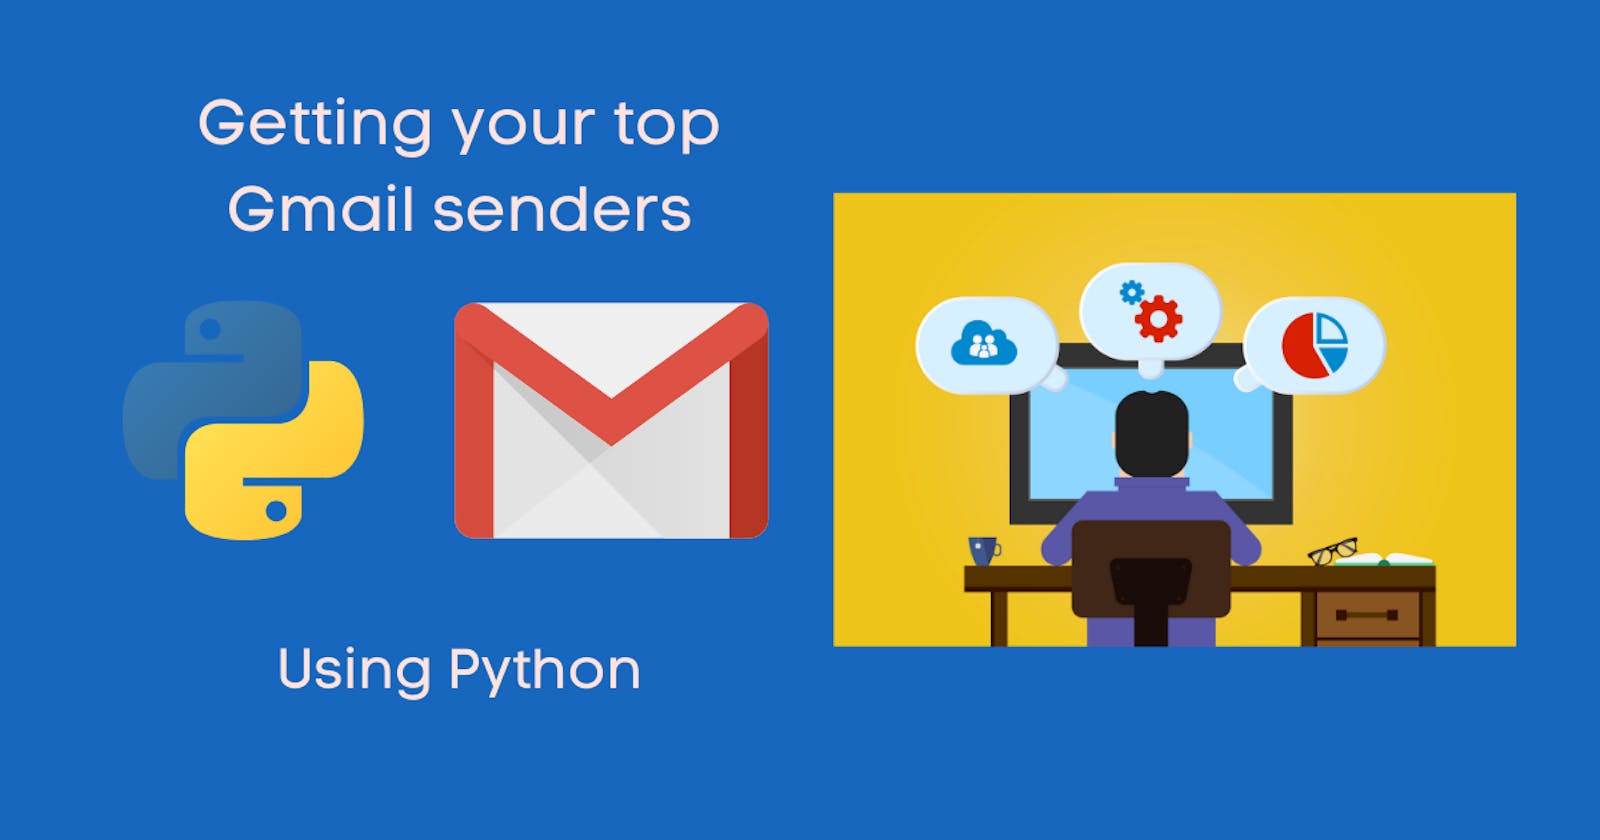 Getting your top Gmail senders with the Google Cloud API using Python